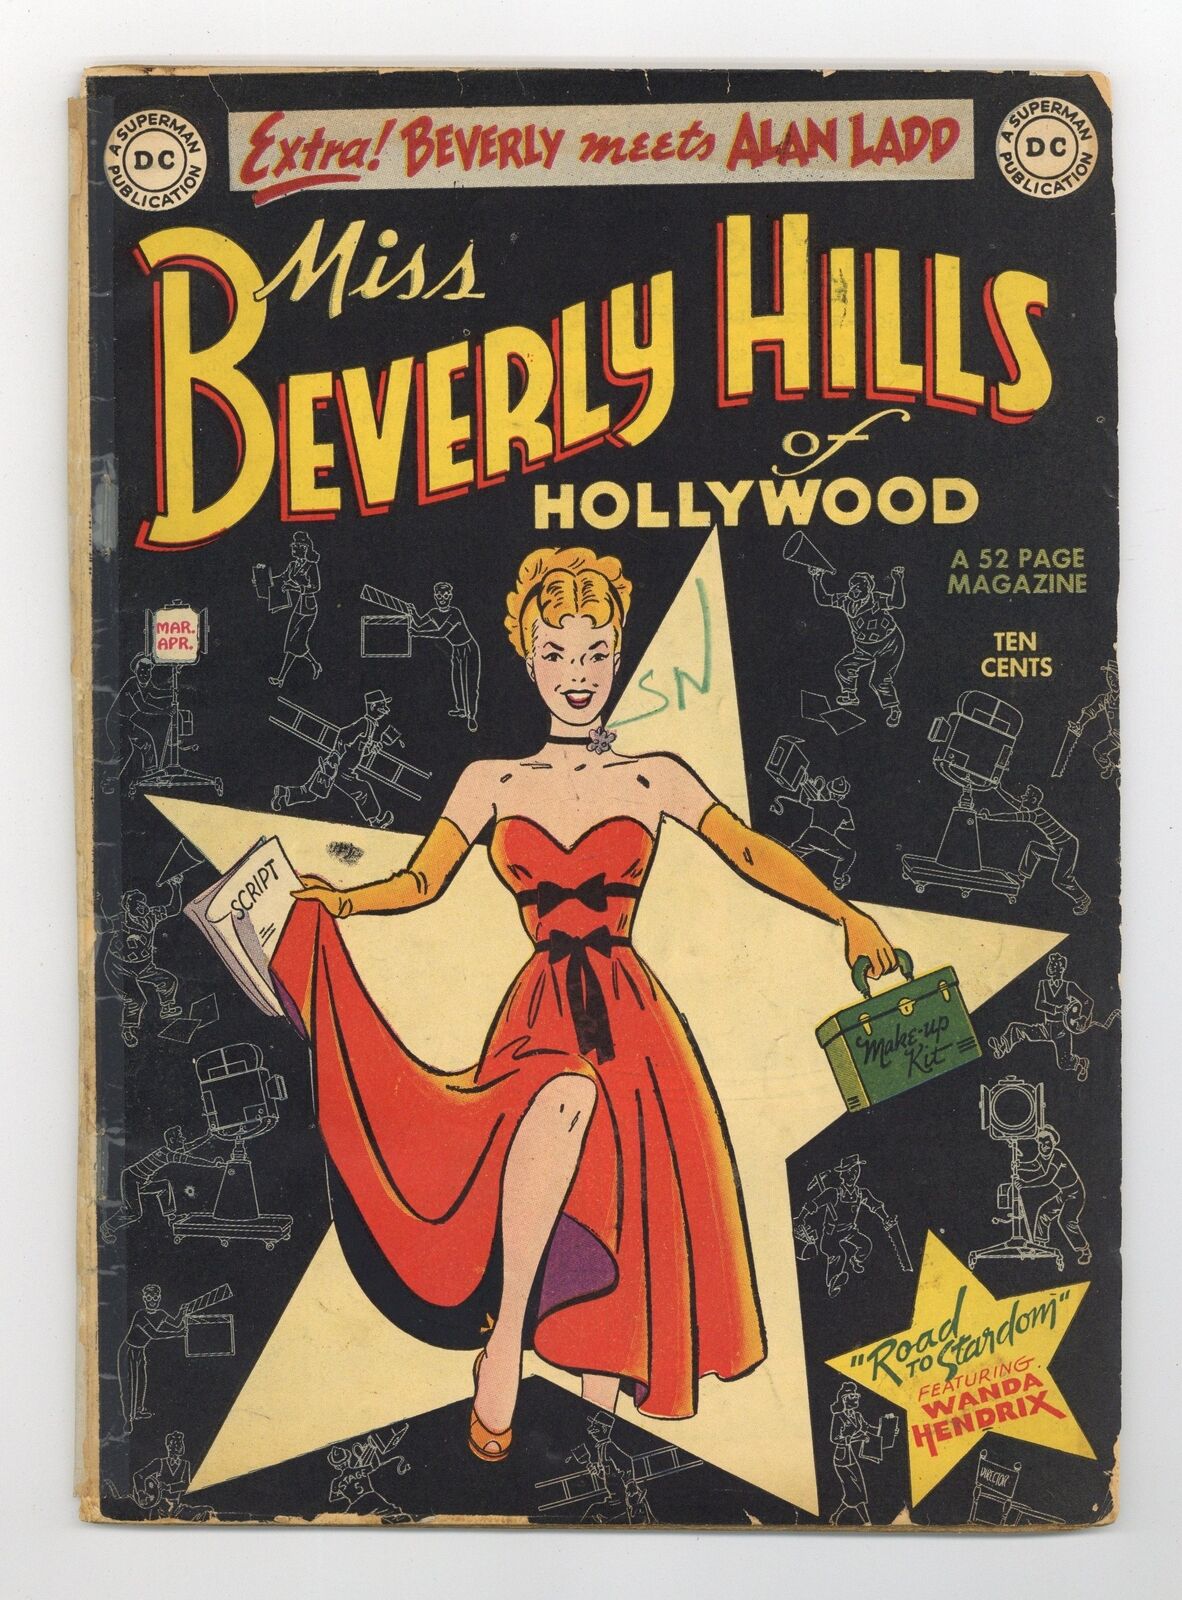 Miss Beverly Hills of Hollywood #1 FR 1.0 1949